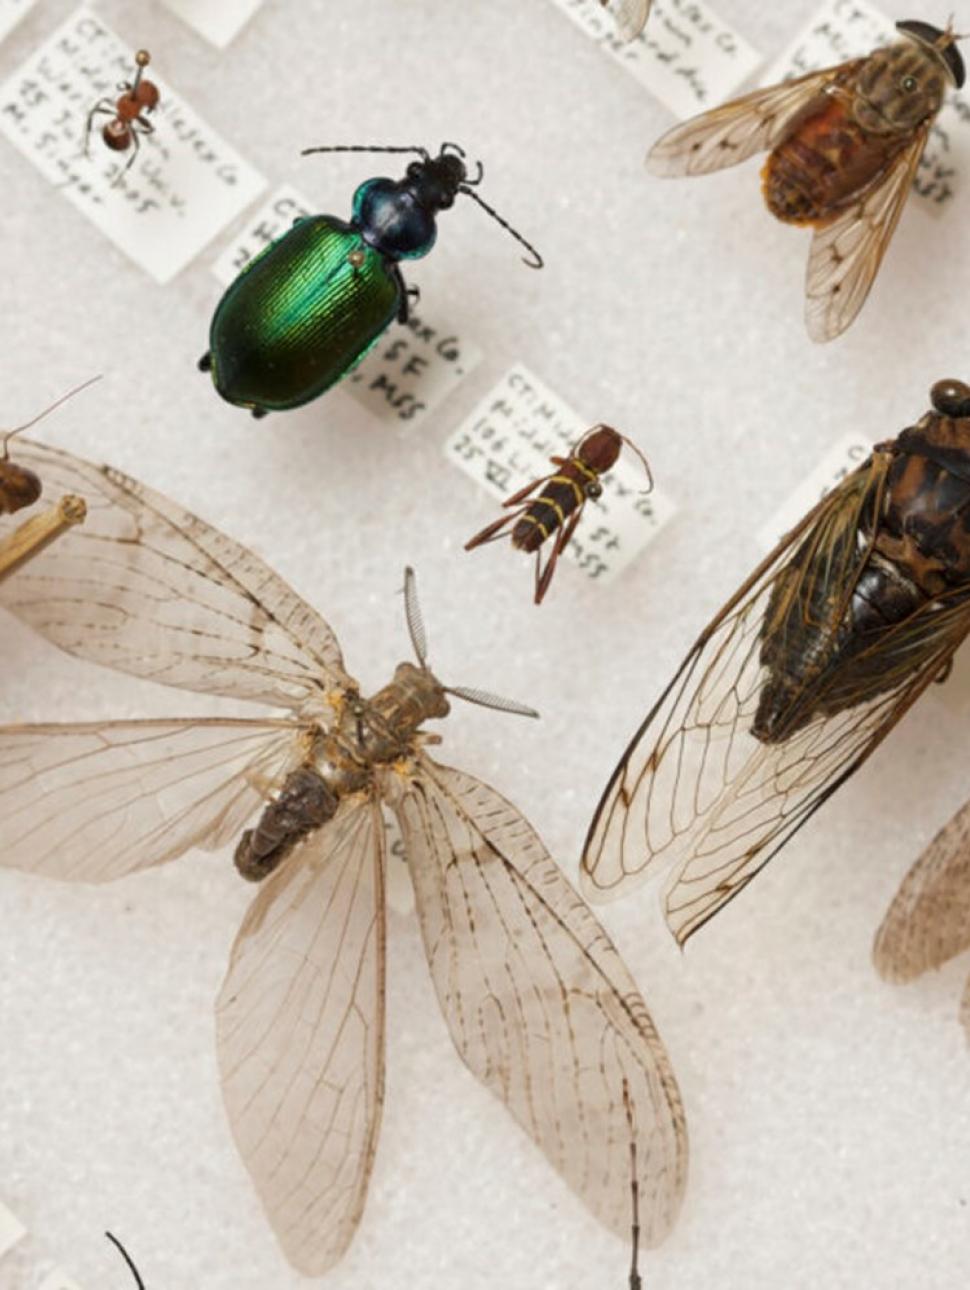 A display of pinned entomology specimens